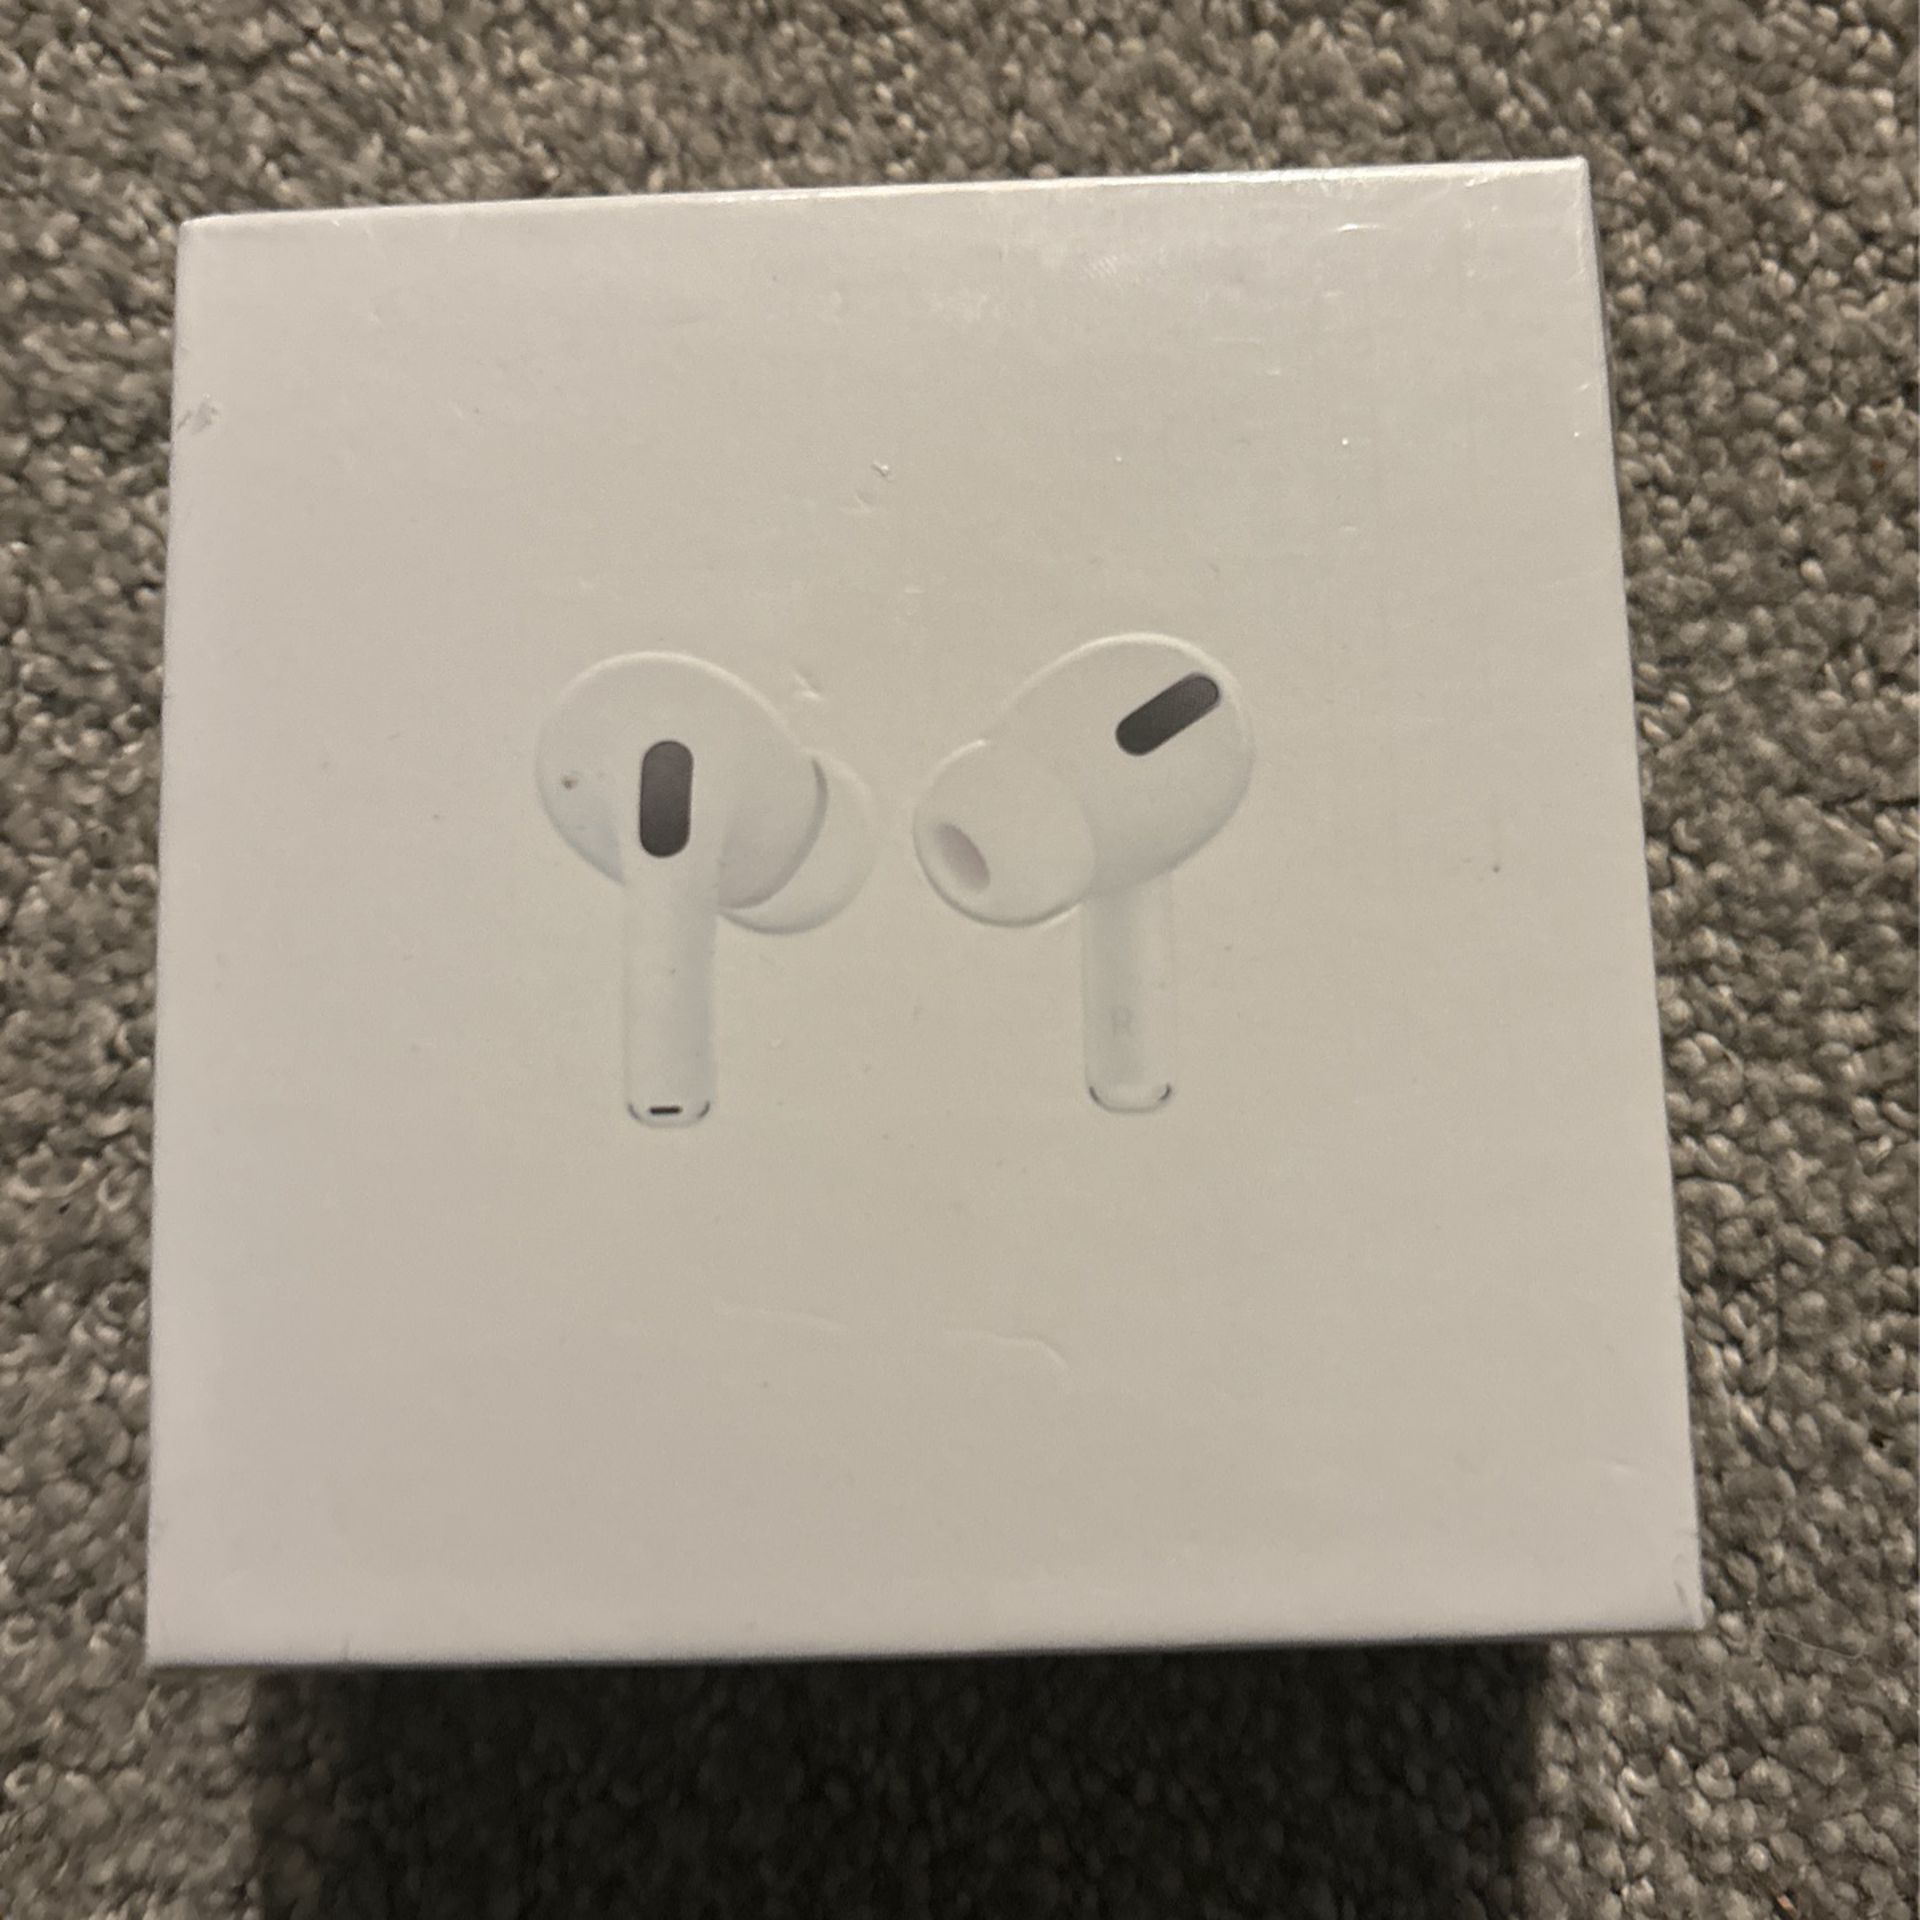 AirPods Pro’s 